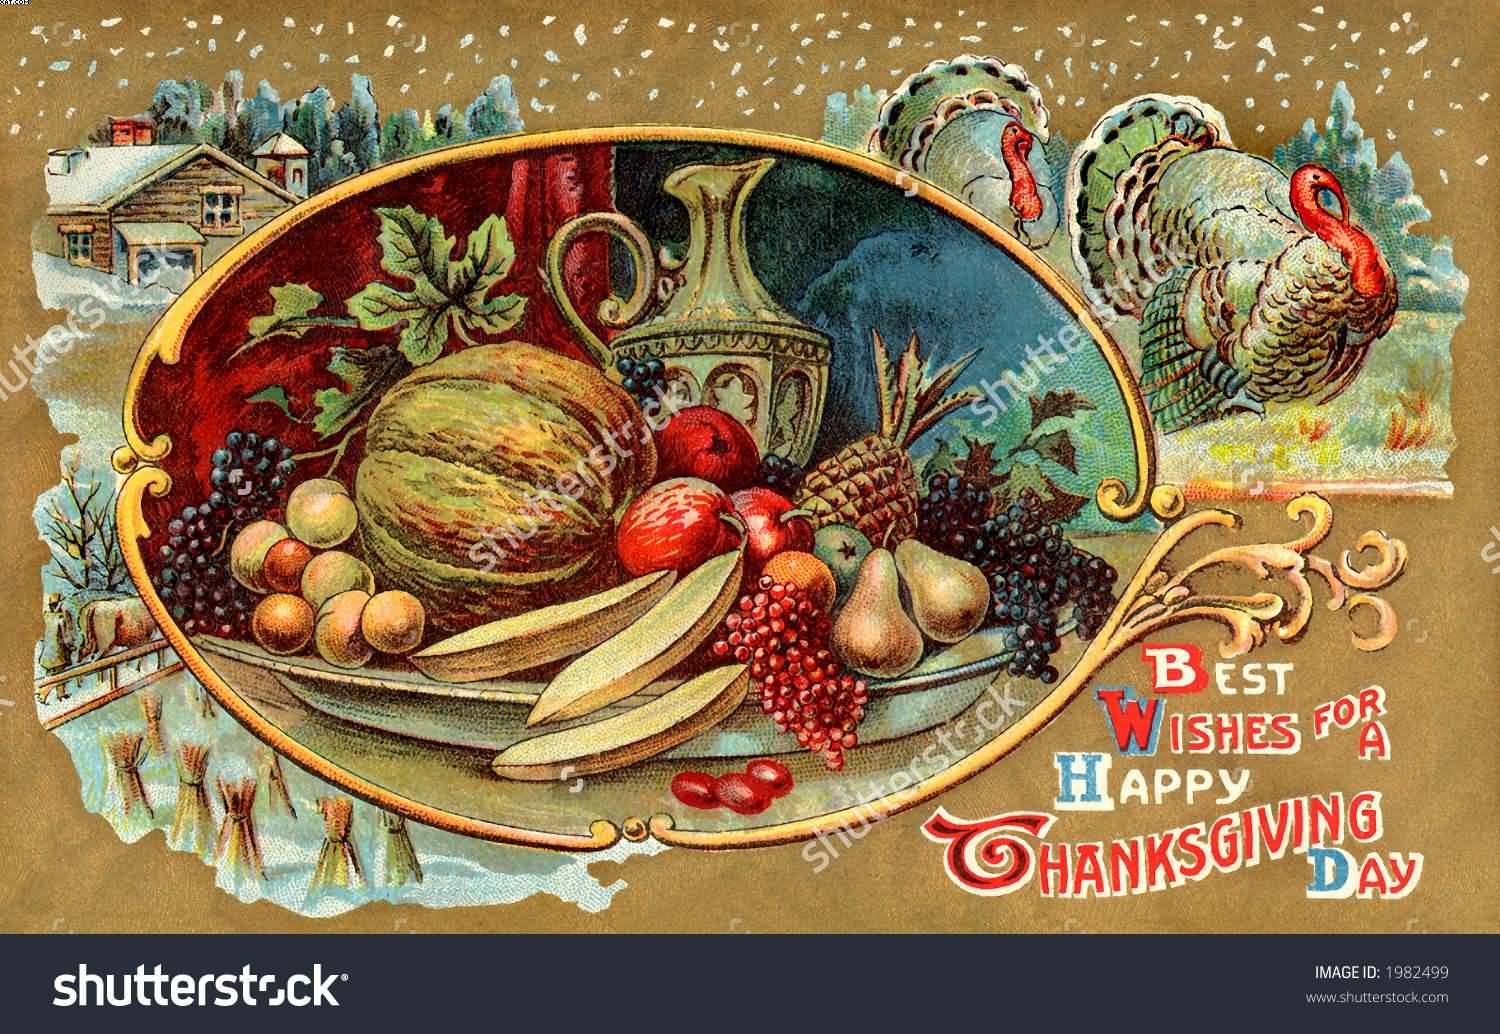 Best wishes for a Happy Thanksgiving day ornate illustration wallpaper